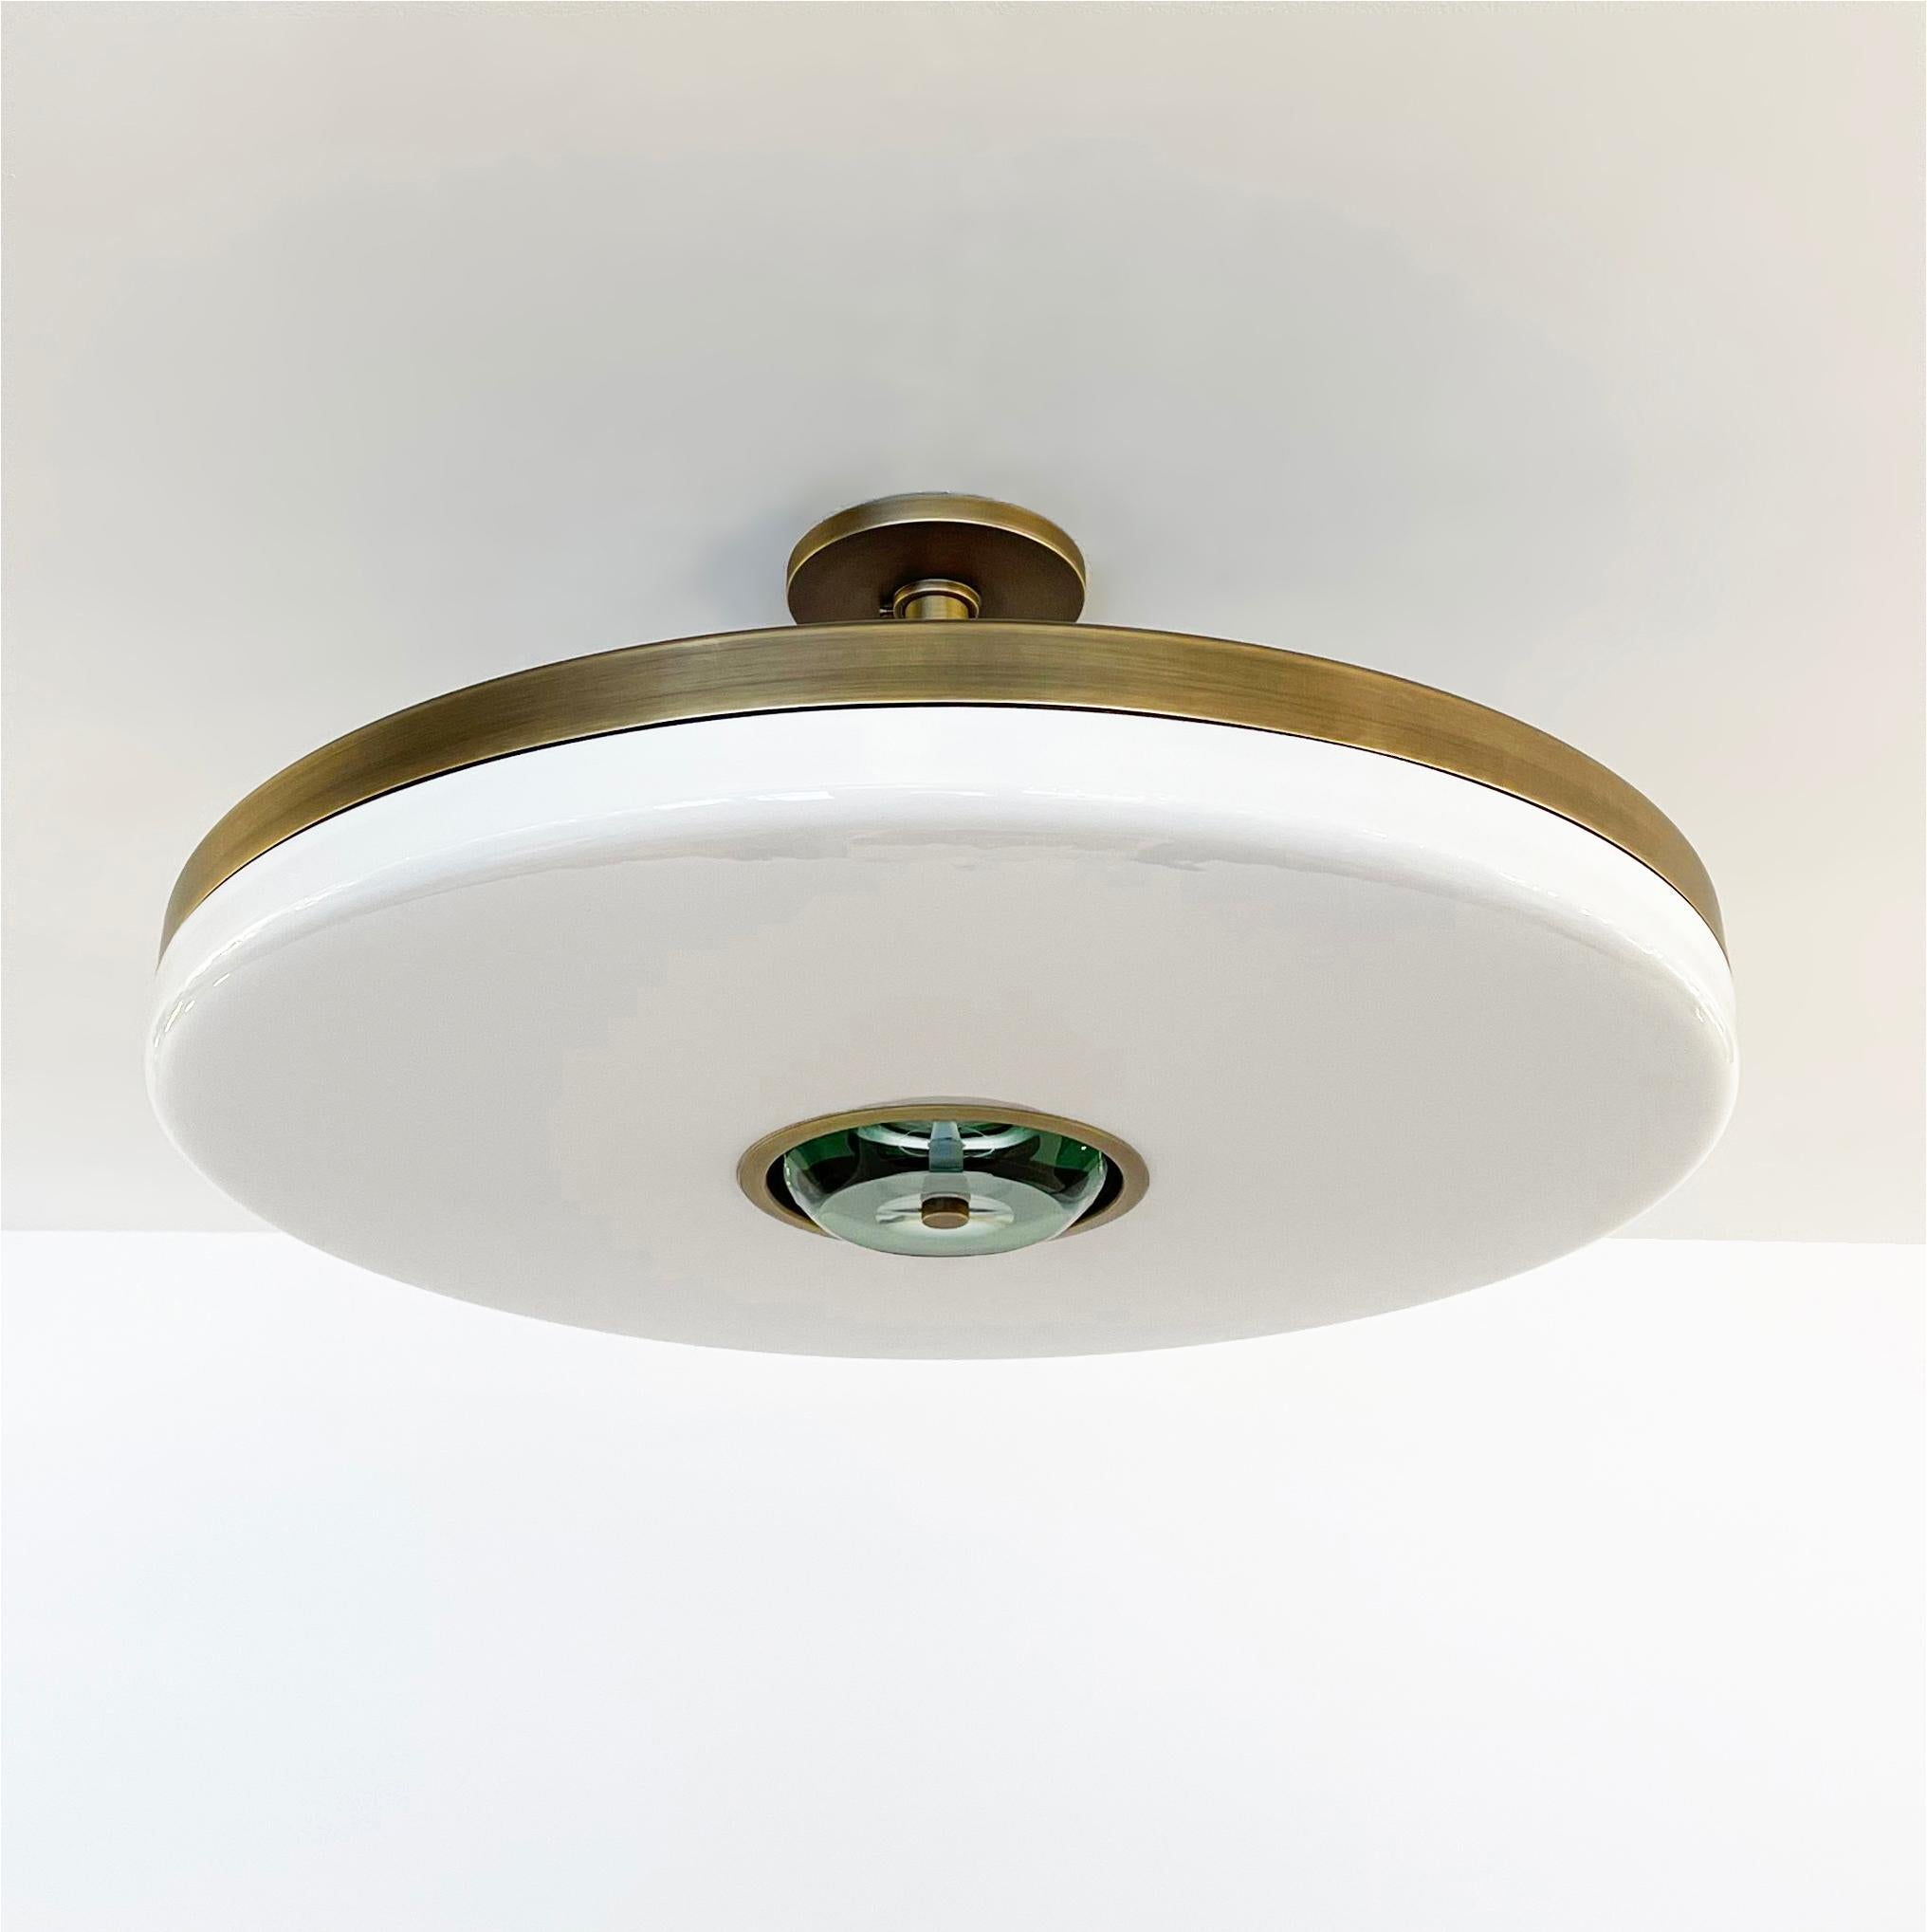 Iris Ceiling Light by Gaspare Asaro-Satin Brass Finish For Sale 7